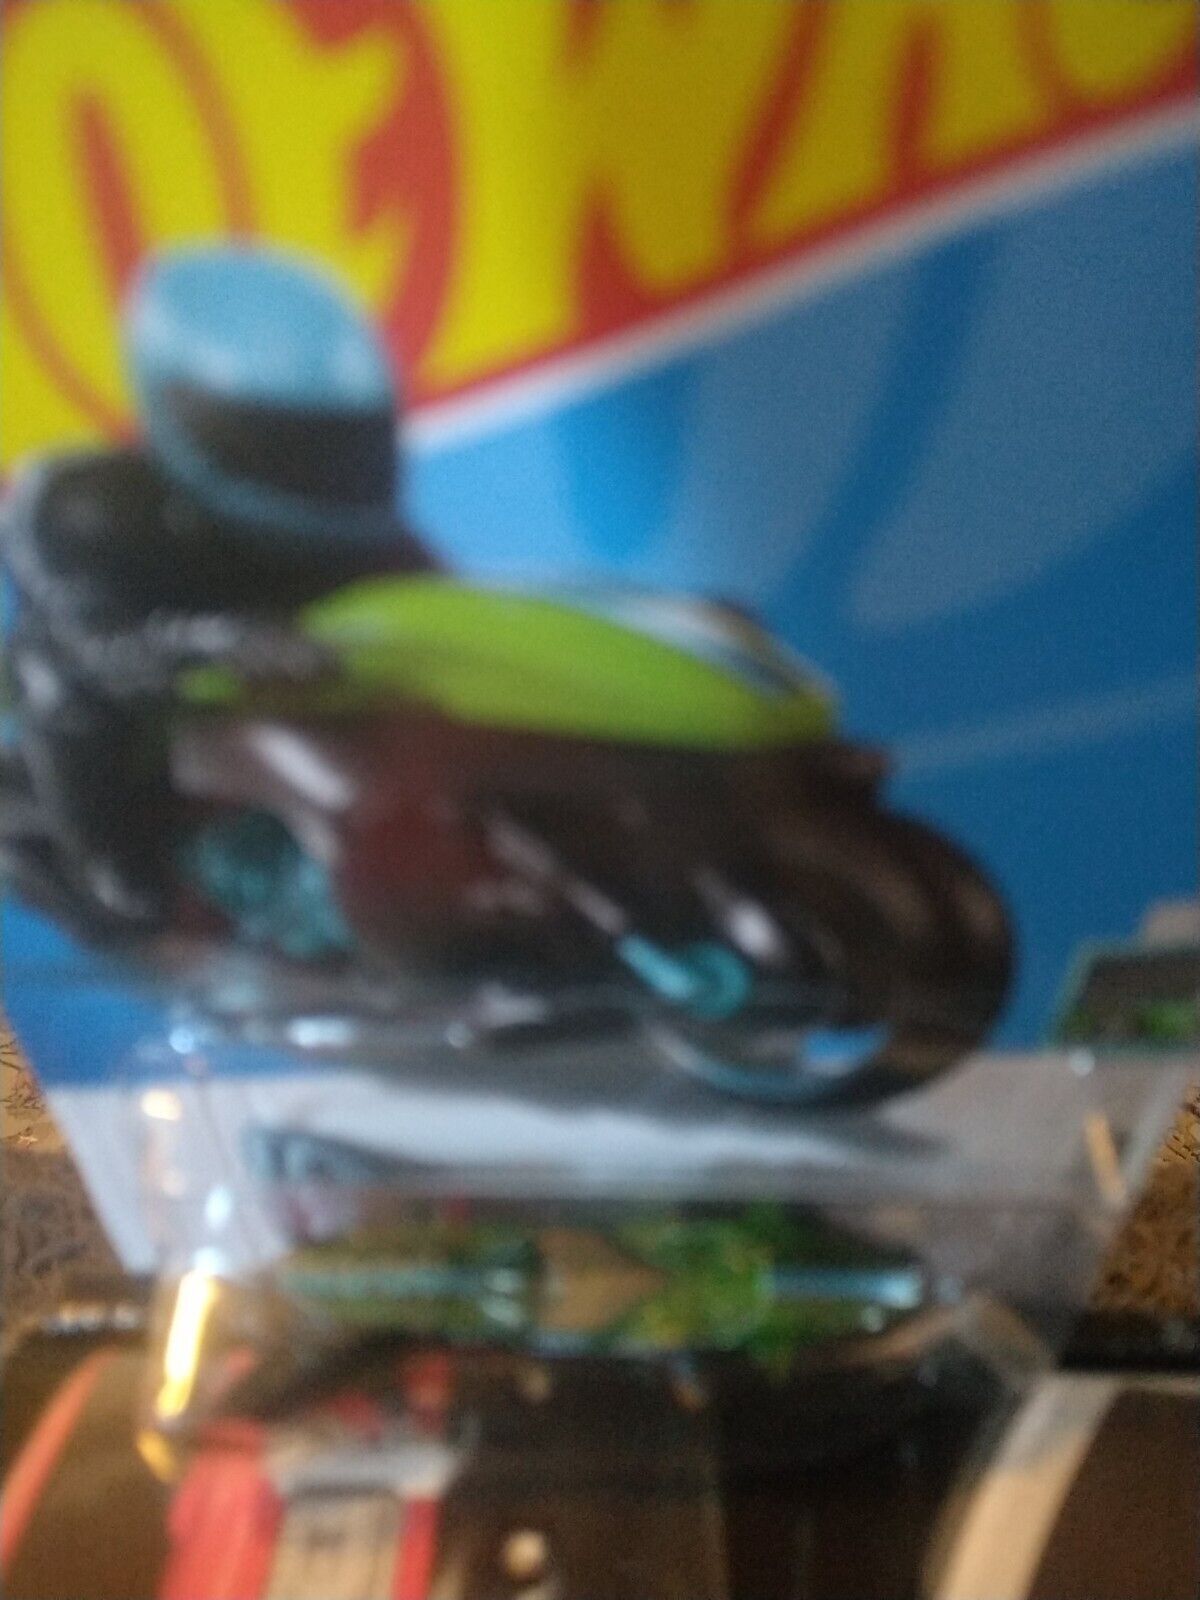 🔥2021 Hot Wheels Fly-By Green HW Contoured #2/5 Motorcycle 45/250 New🔥